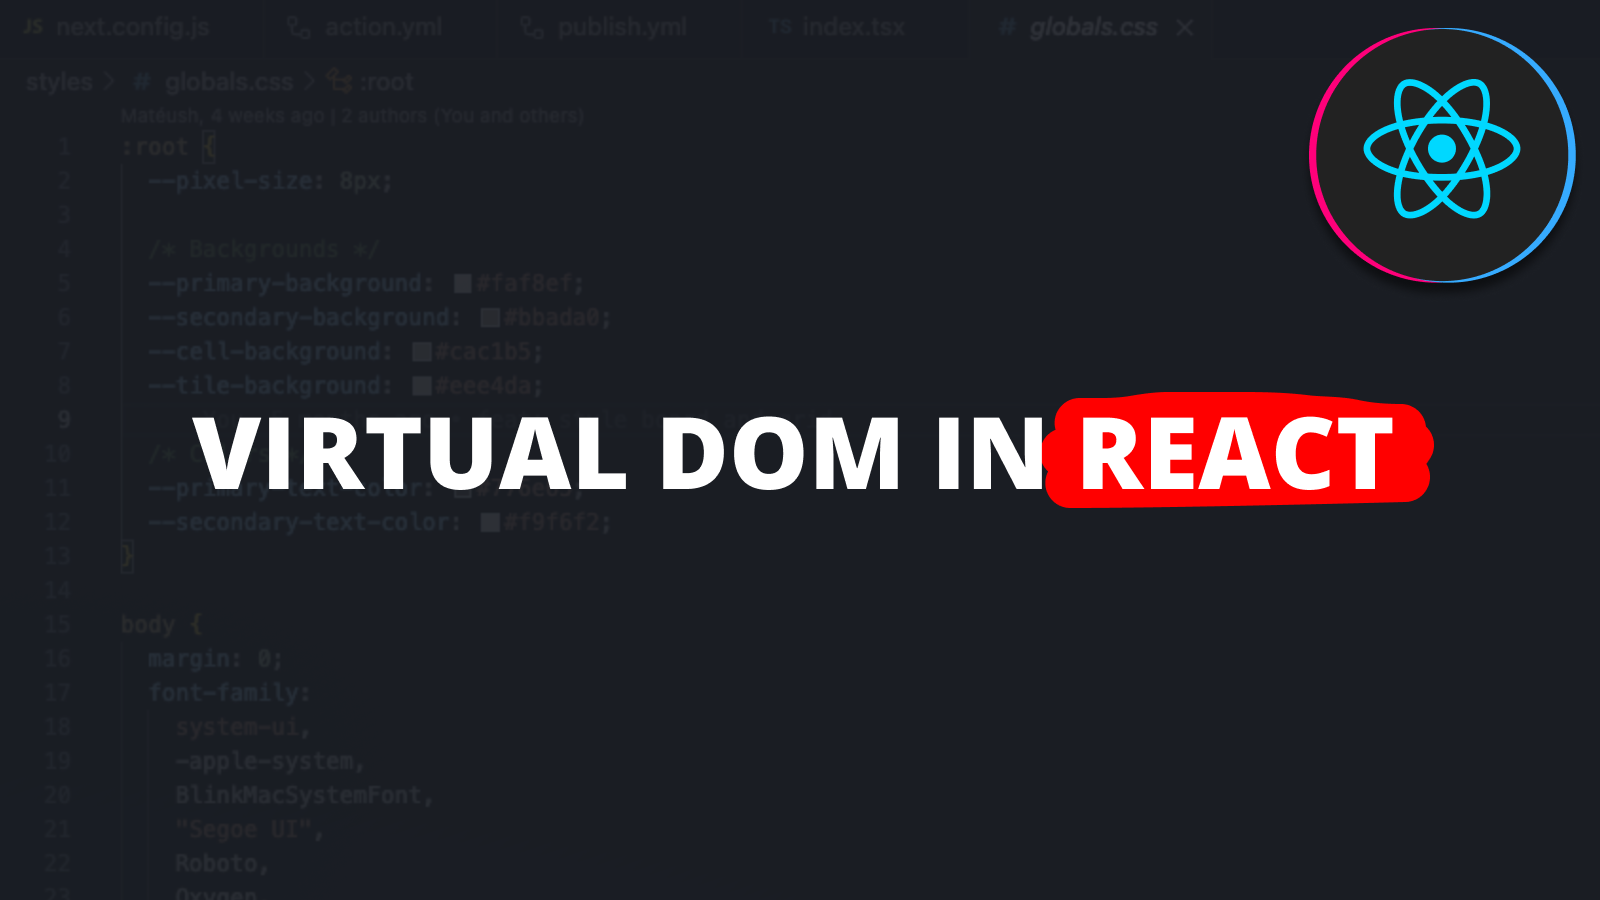 What is the Virtual DOM in React?